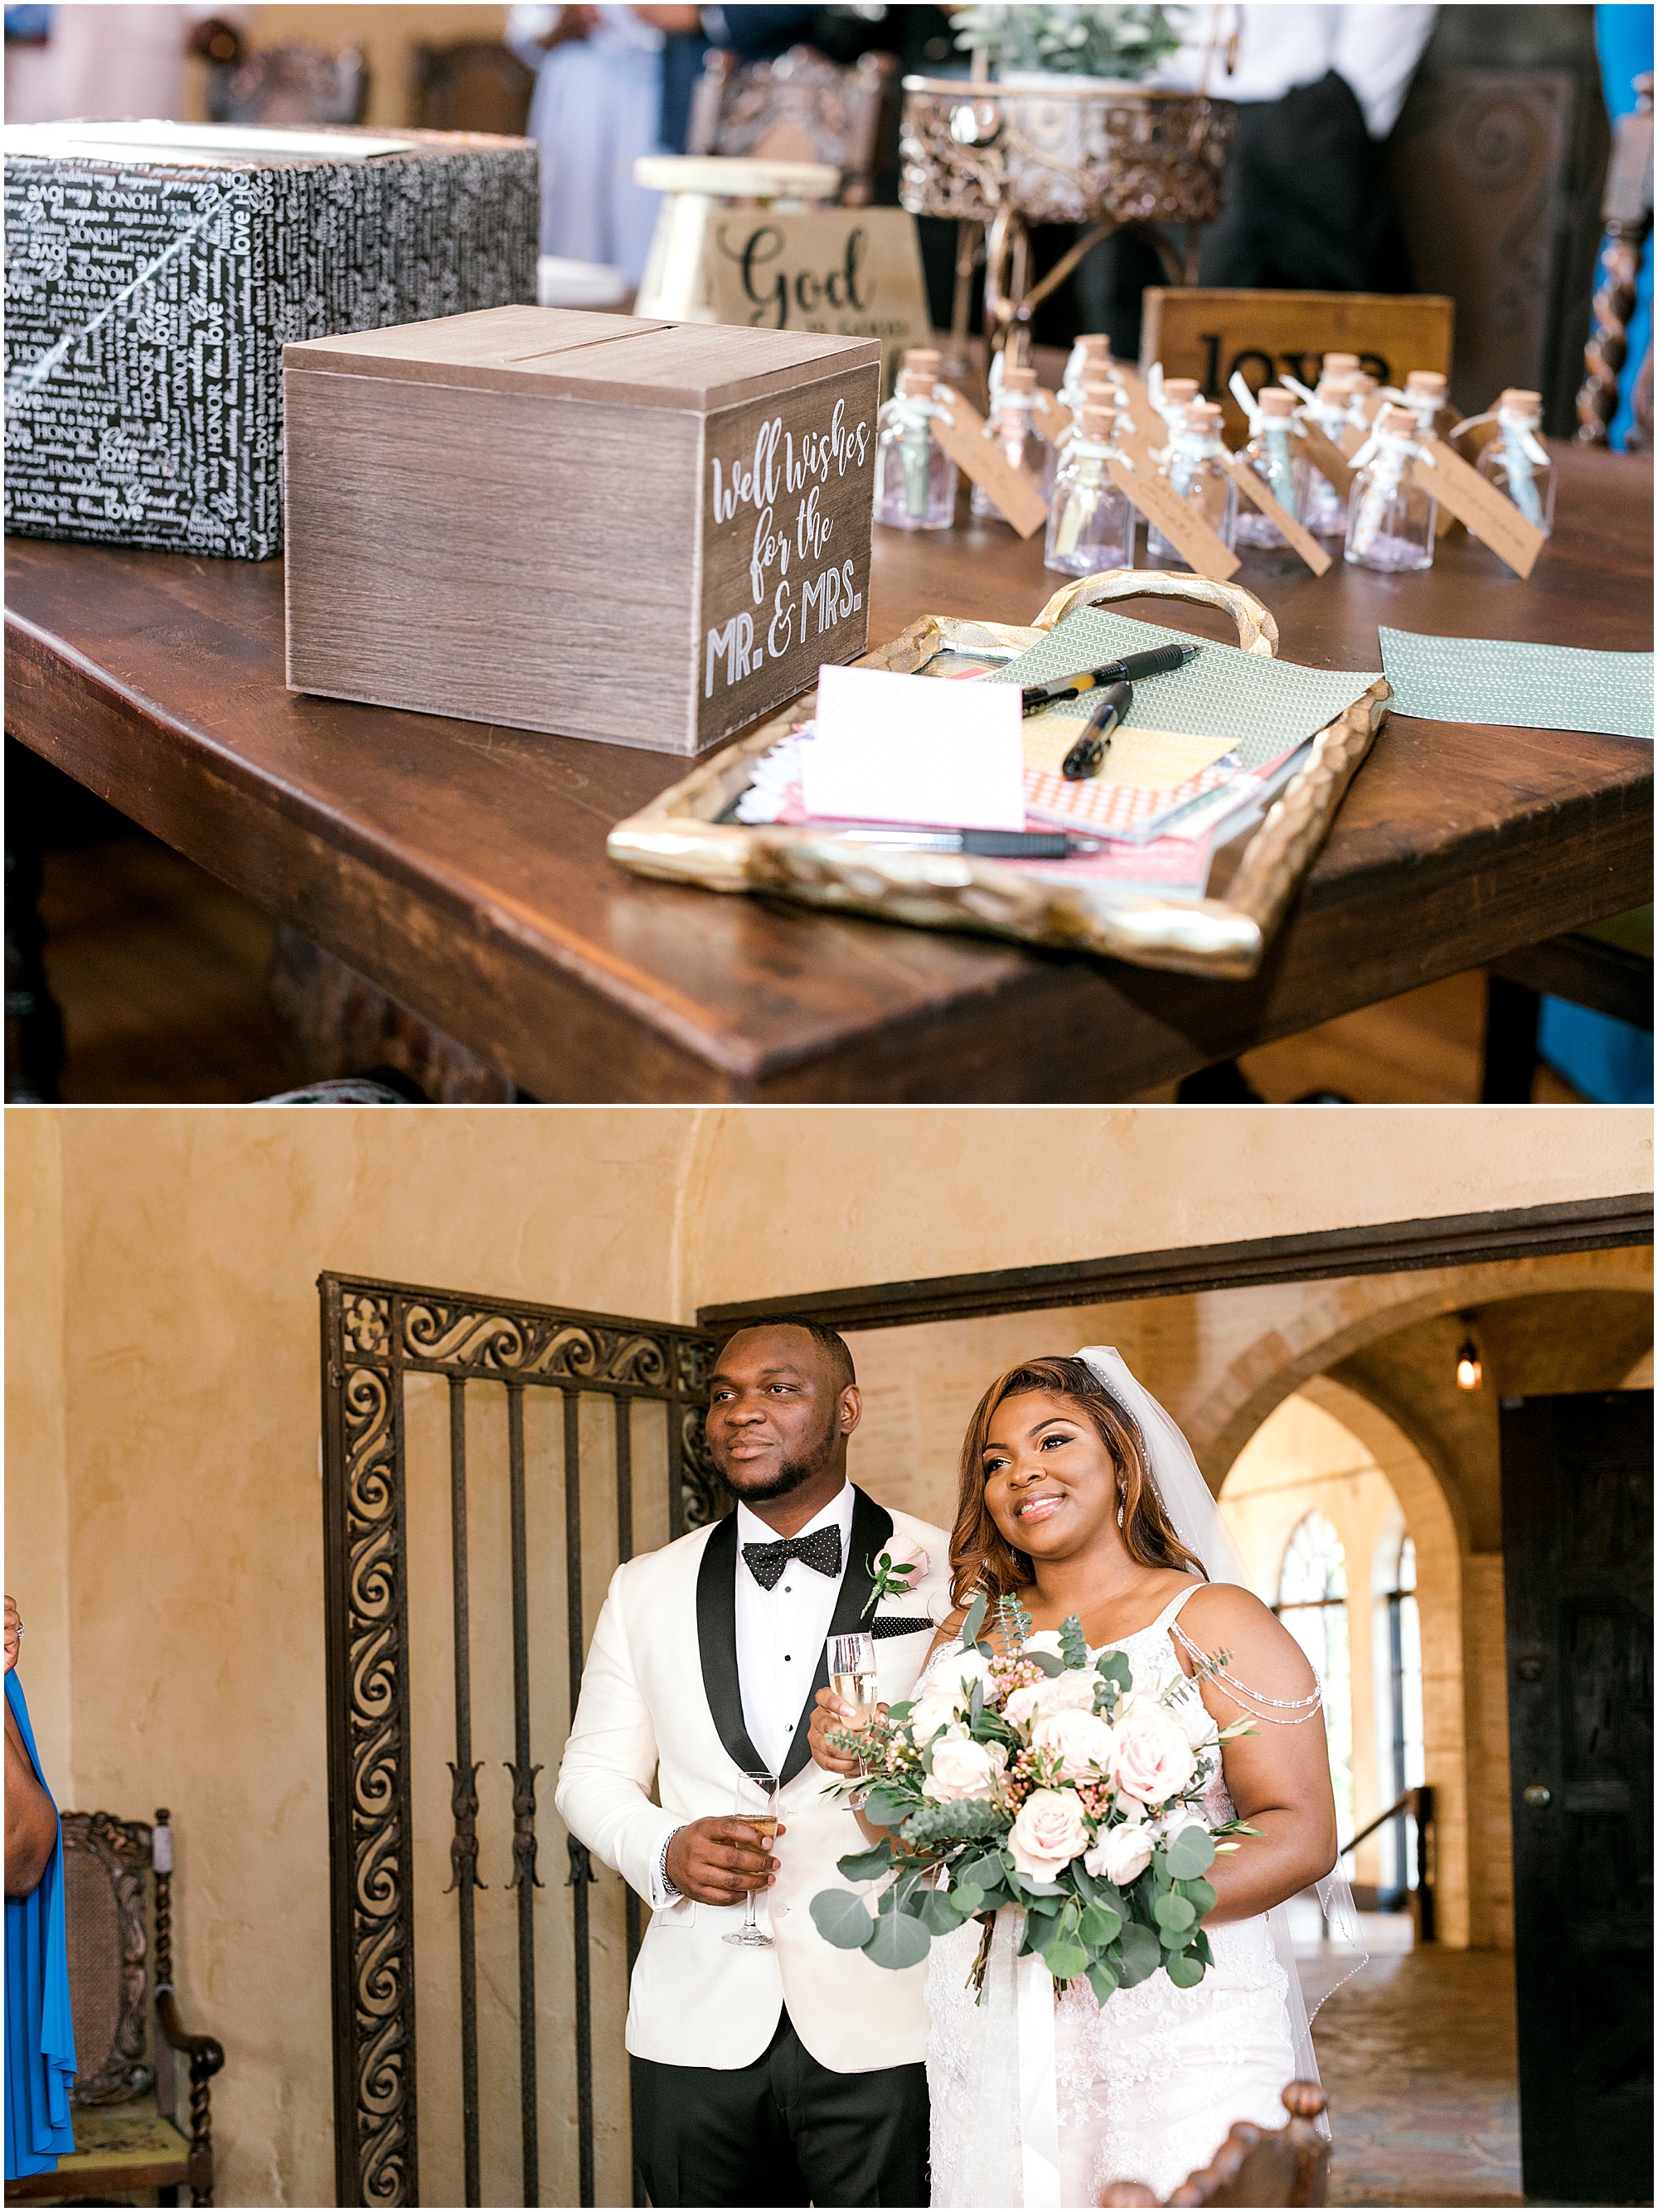 Close up of the guest book and the bride and groom entering the room